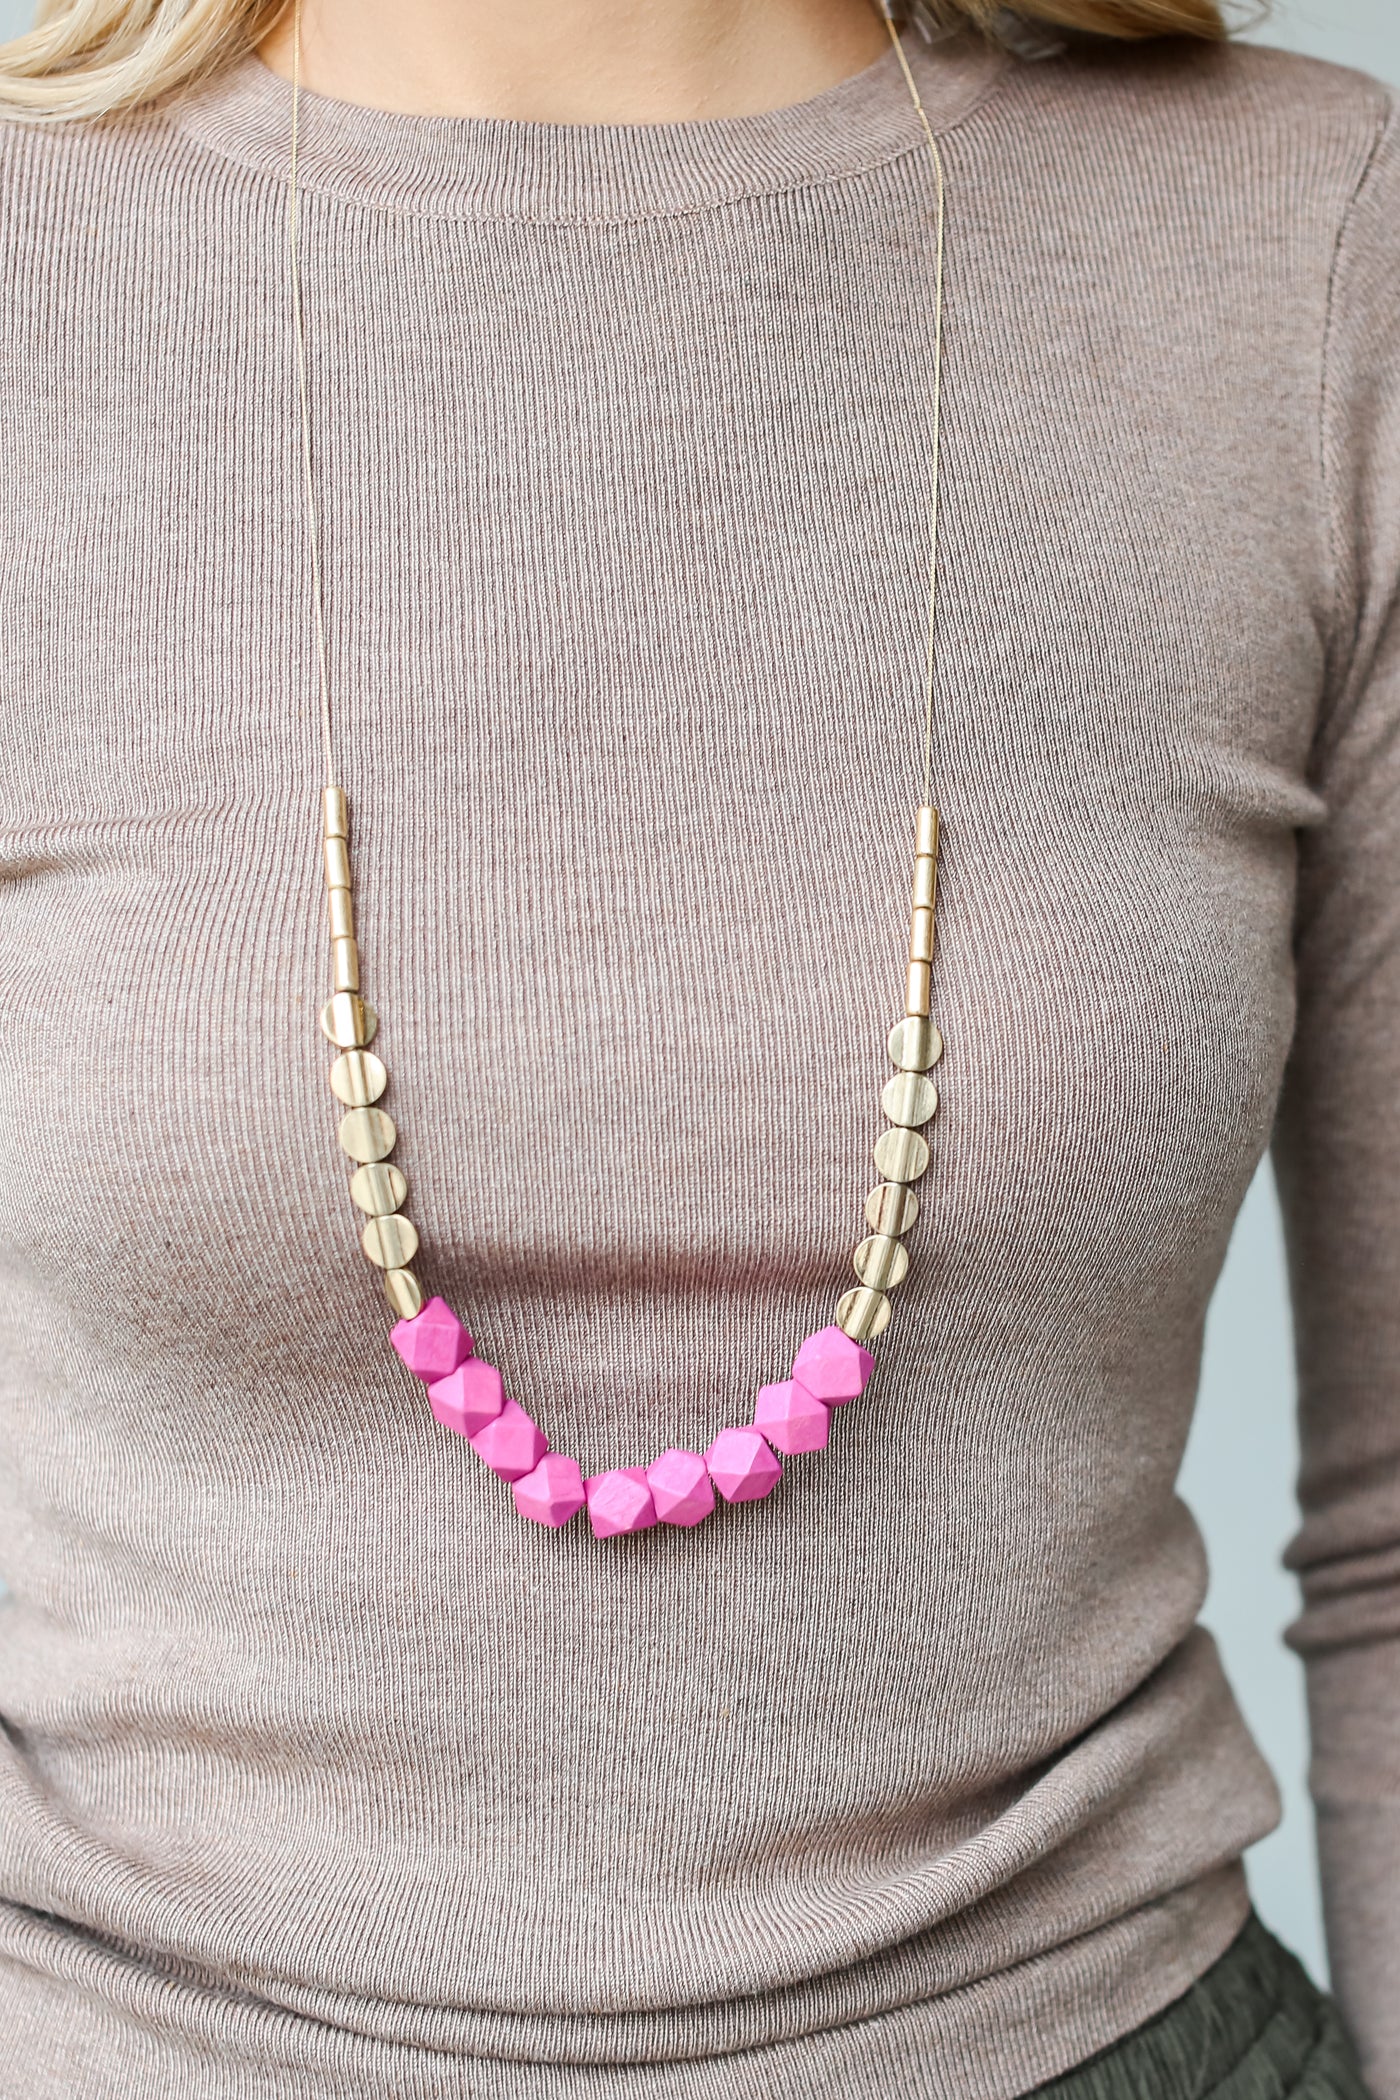 pink beaded necklaces for women